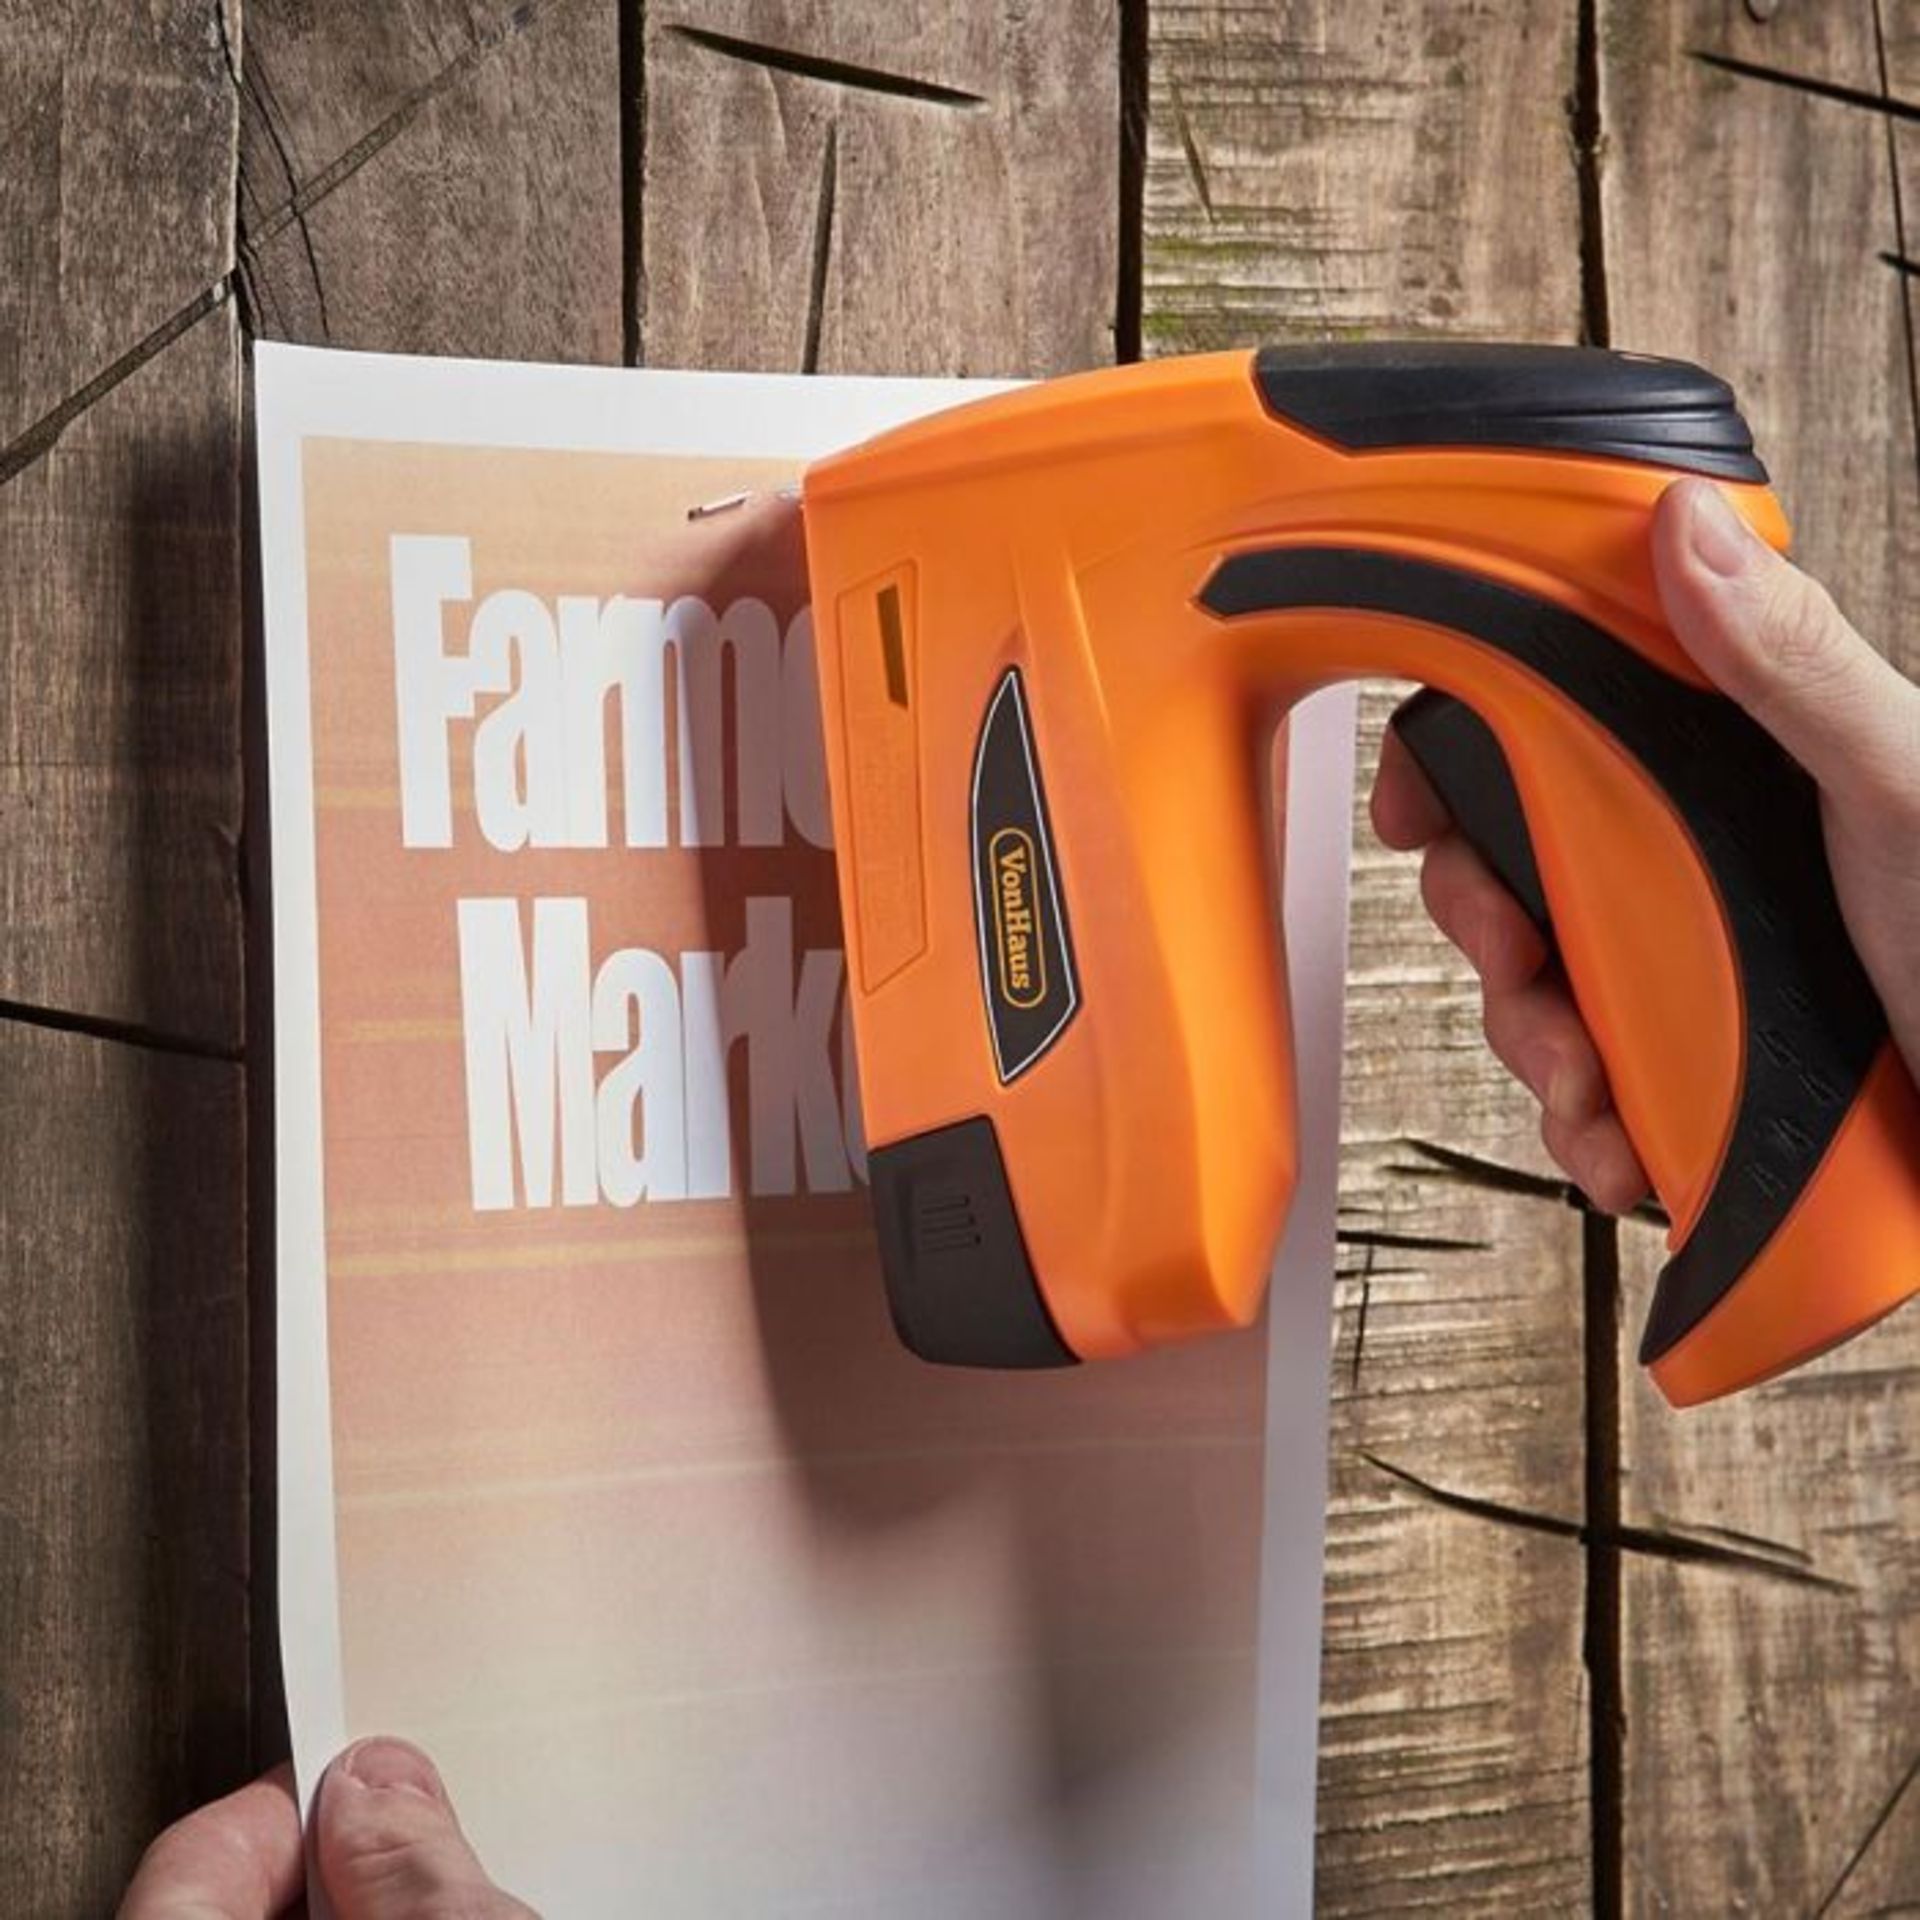 (S450) 3.6V Nailer & Stapler Ideal for crafting and decorating – quickly staple, nail or fa...